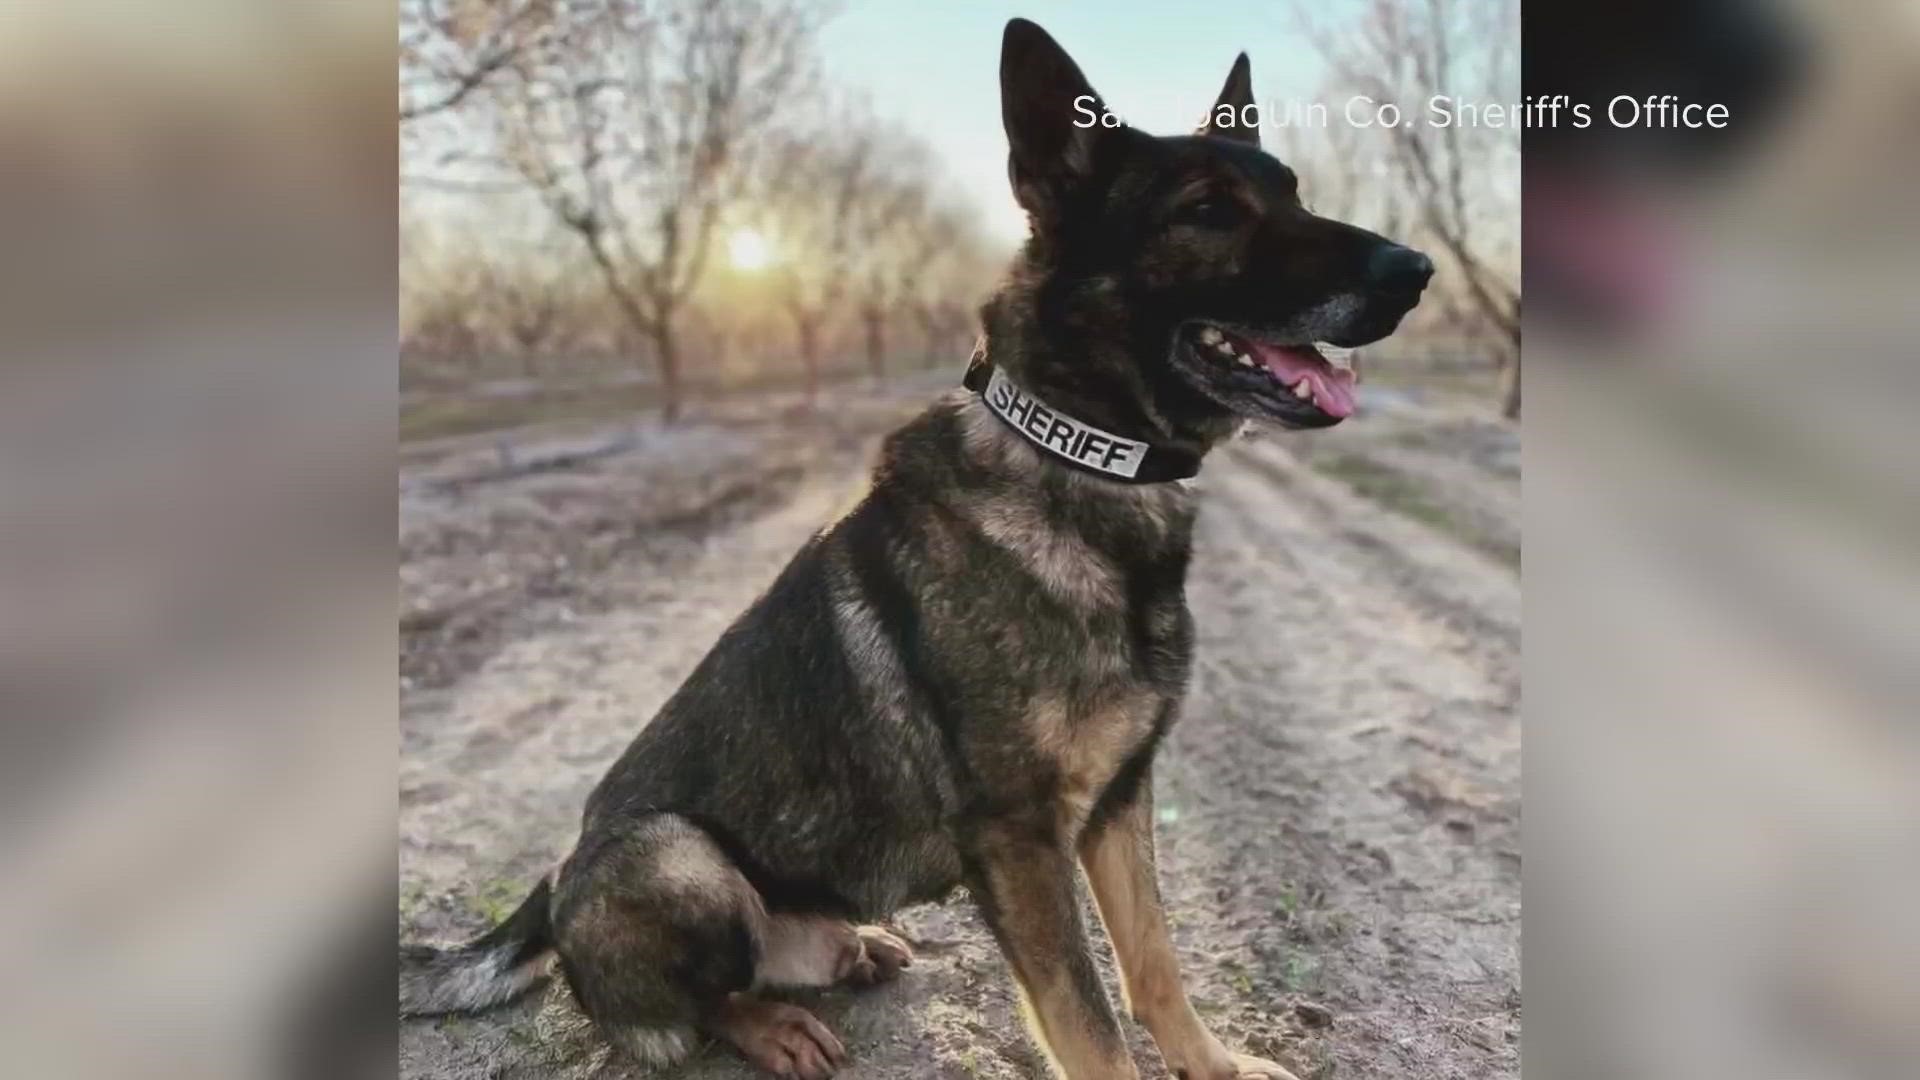 The suspect who K9 Duke was attempting to detain is now in custody, officials said.